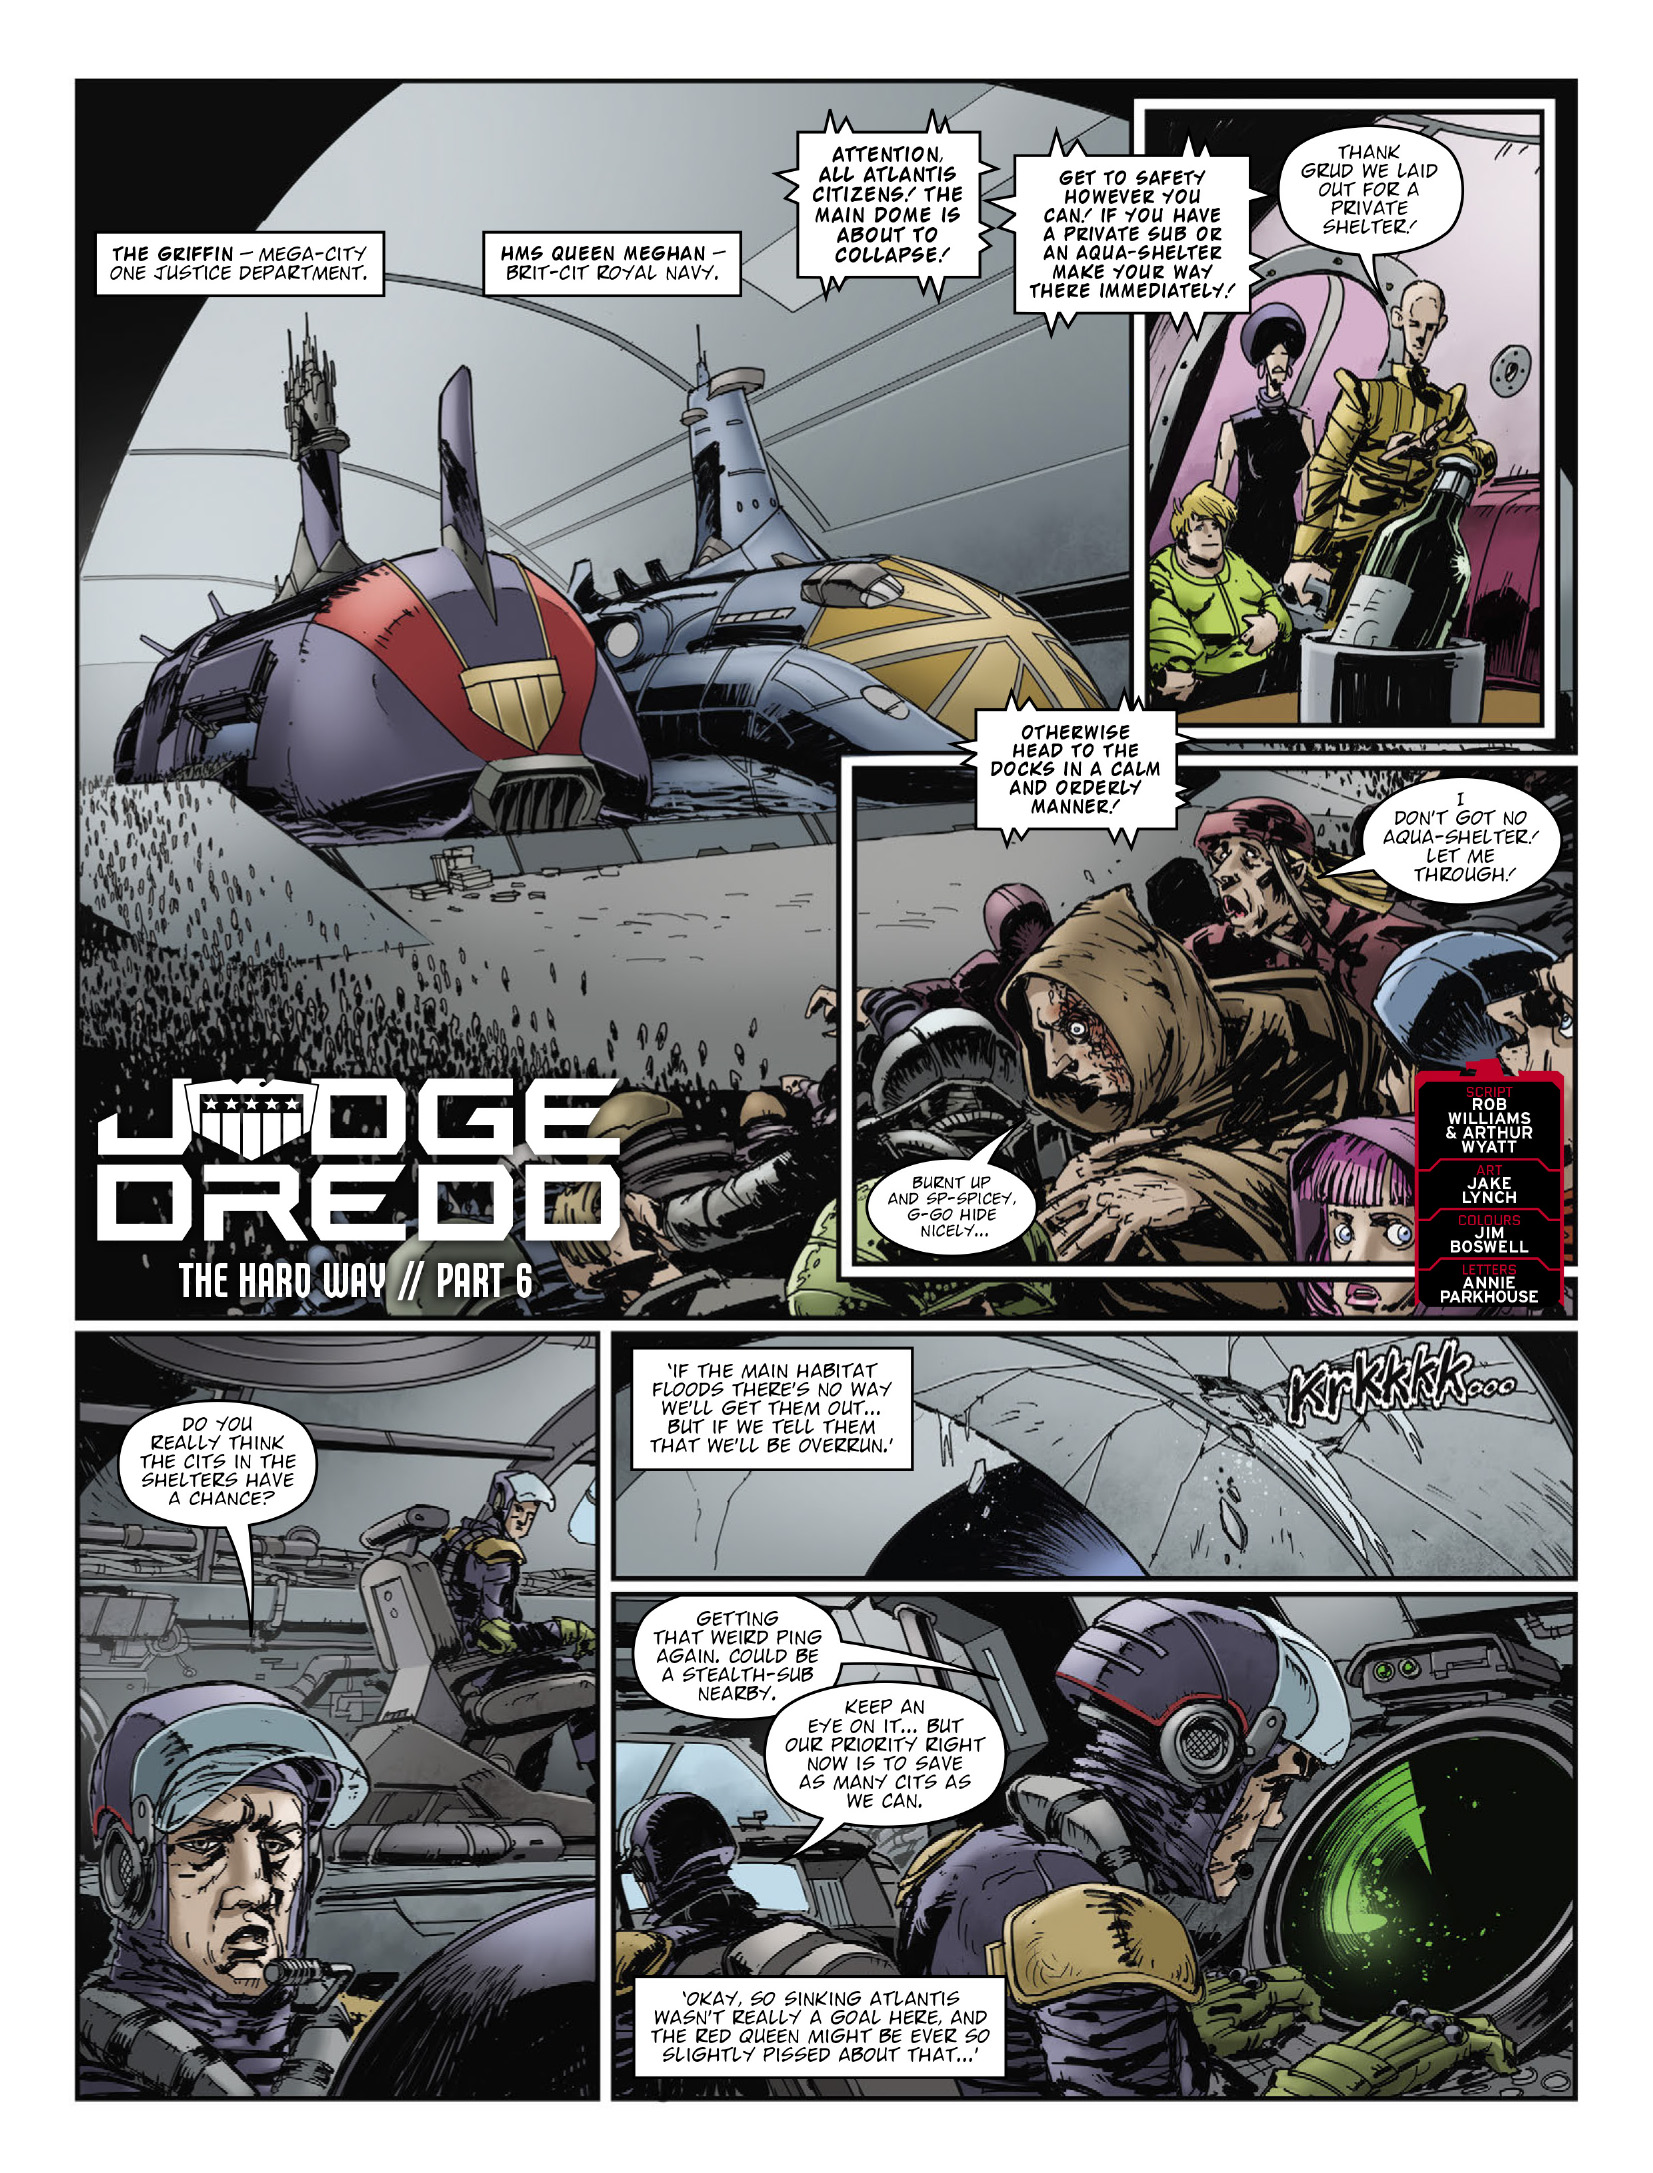 2000 AD: Chapter 2255 - Page 3